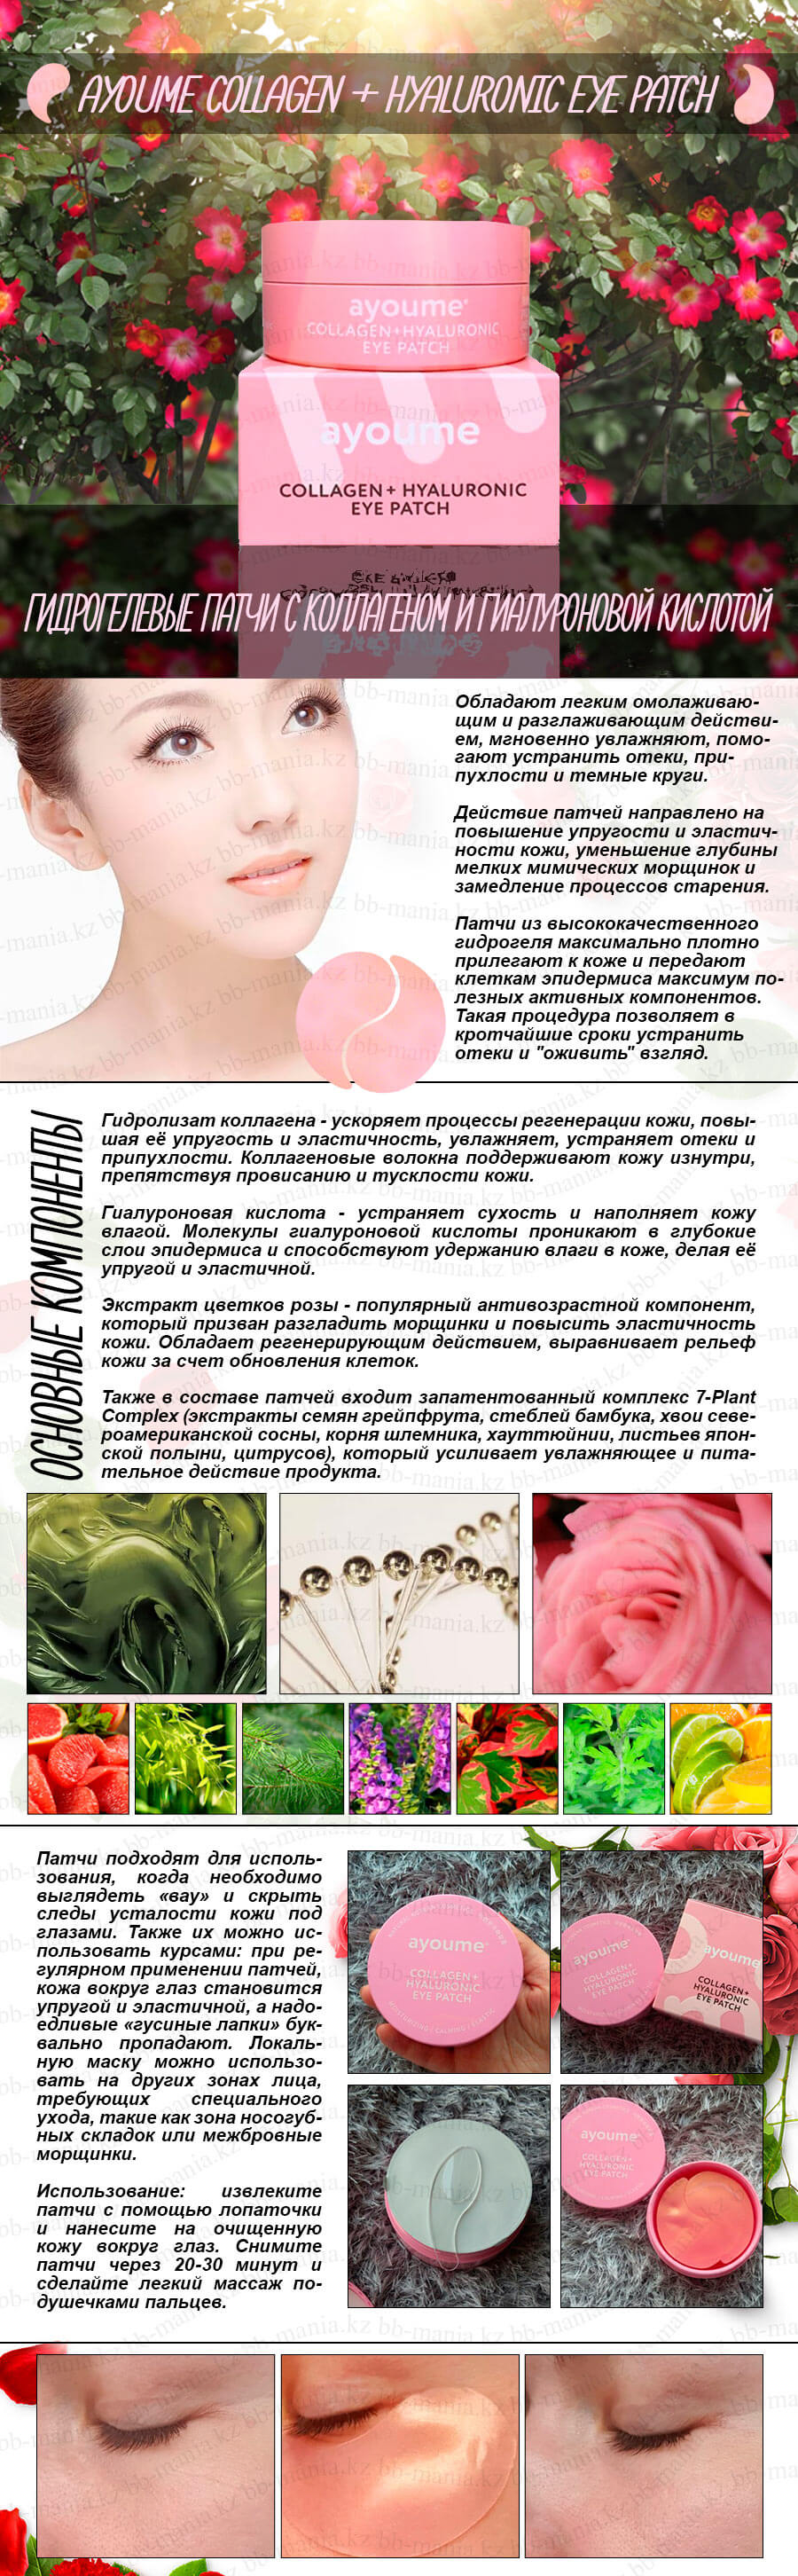 Collagen- -Hyaluronic-Eye-Patch-[Ayoume]